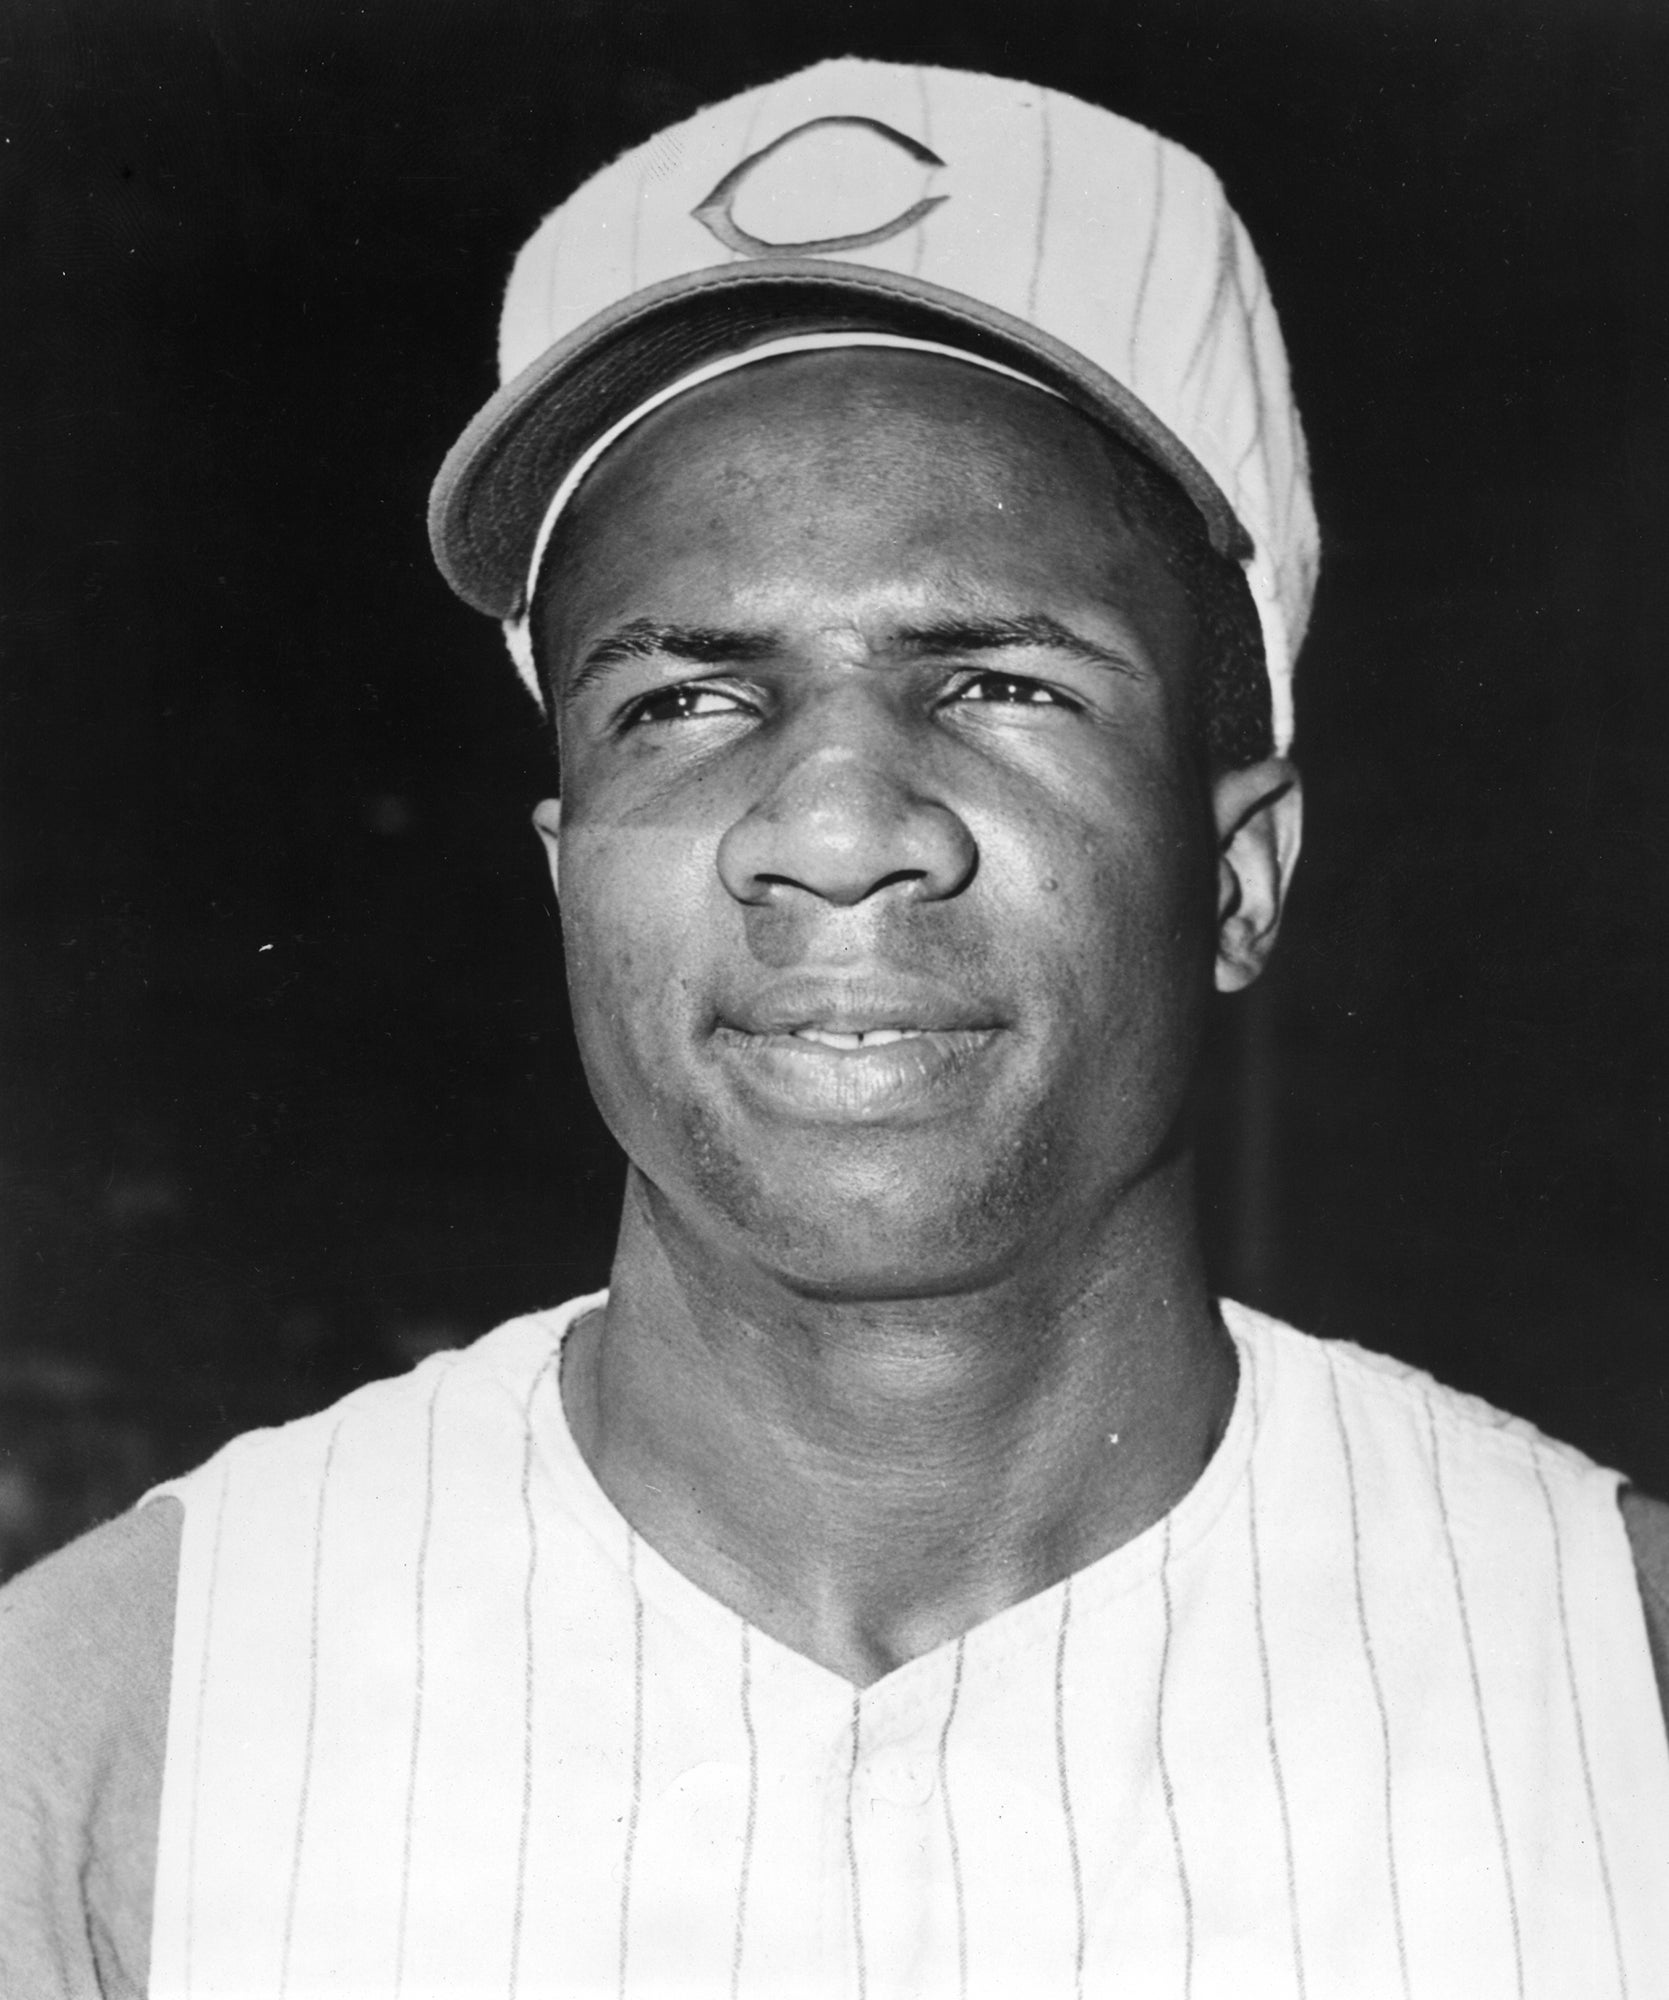 There Was Only One Frank Robinson